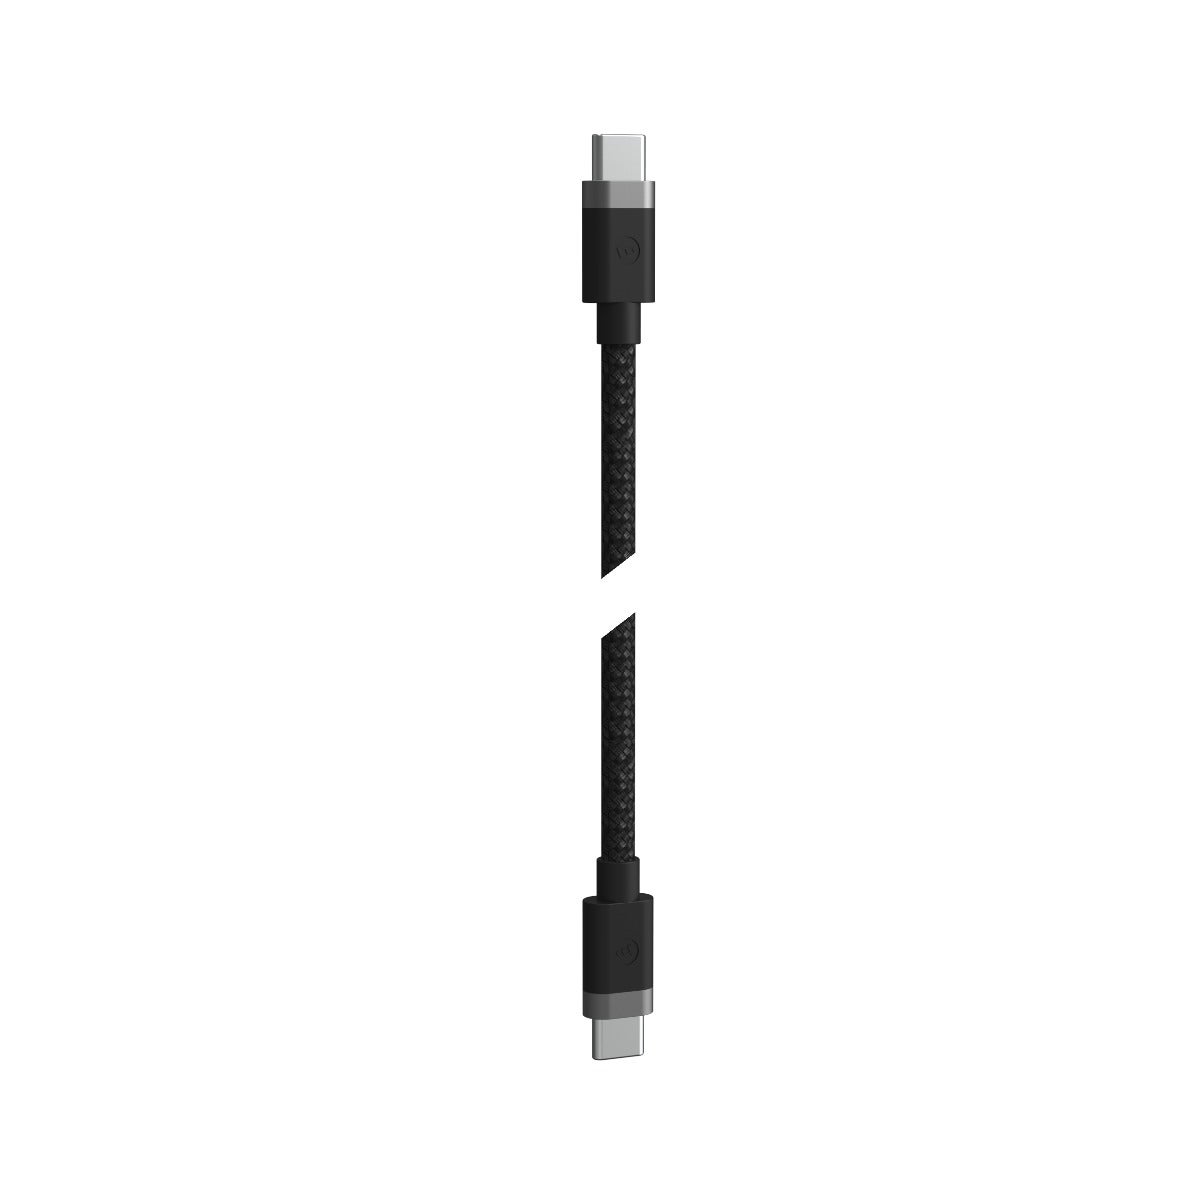 Mophie USB-C Cable With USB-C Connector (Apple Exclusive 2021)